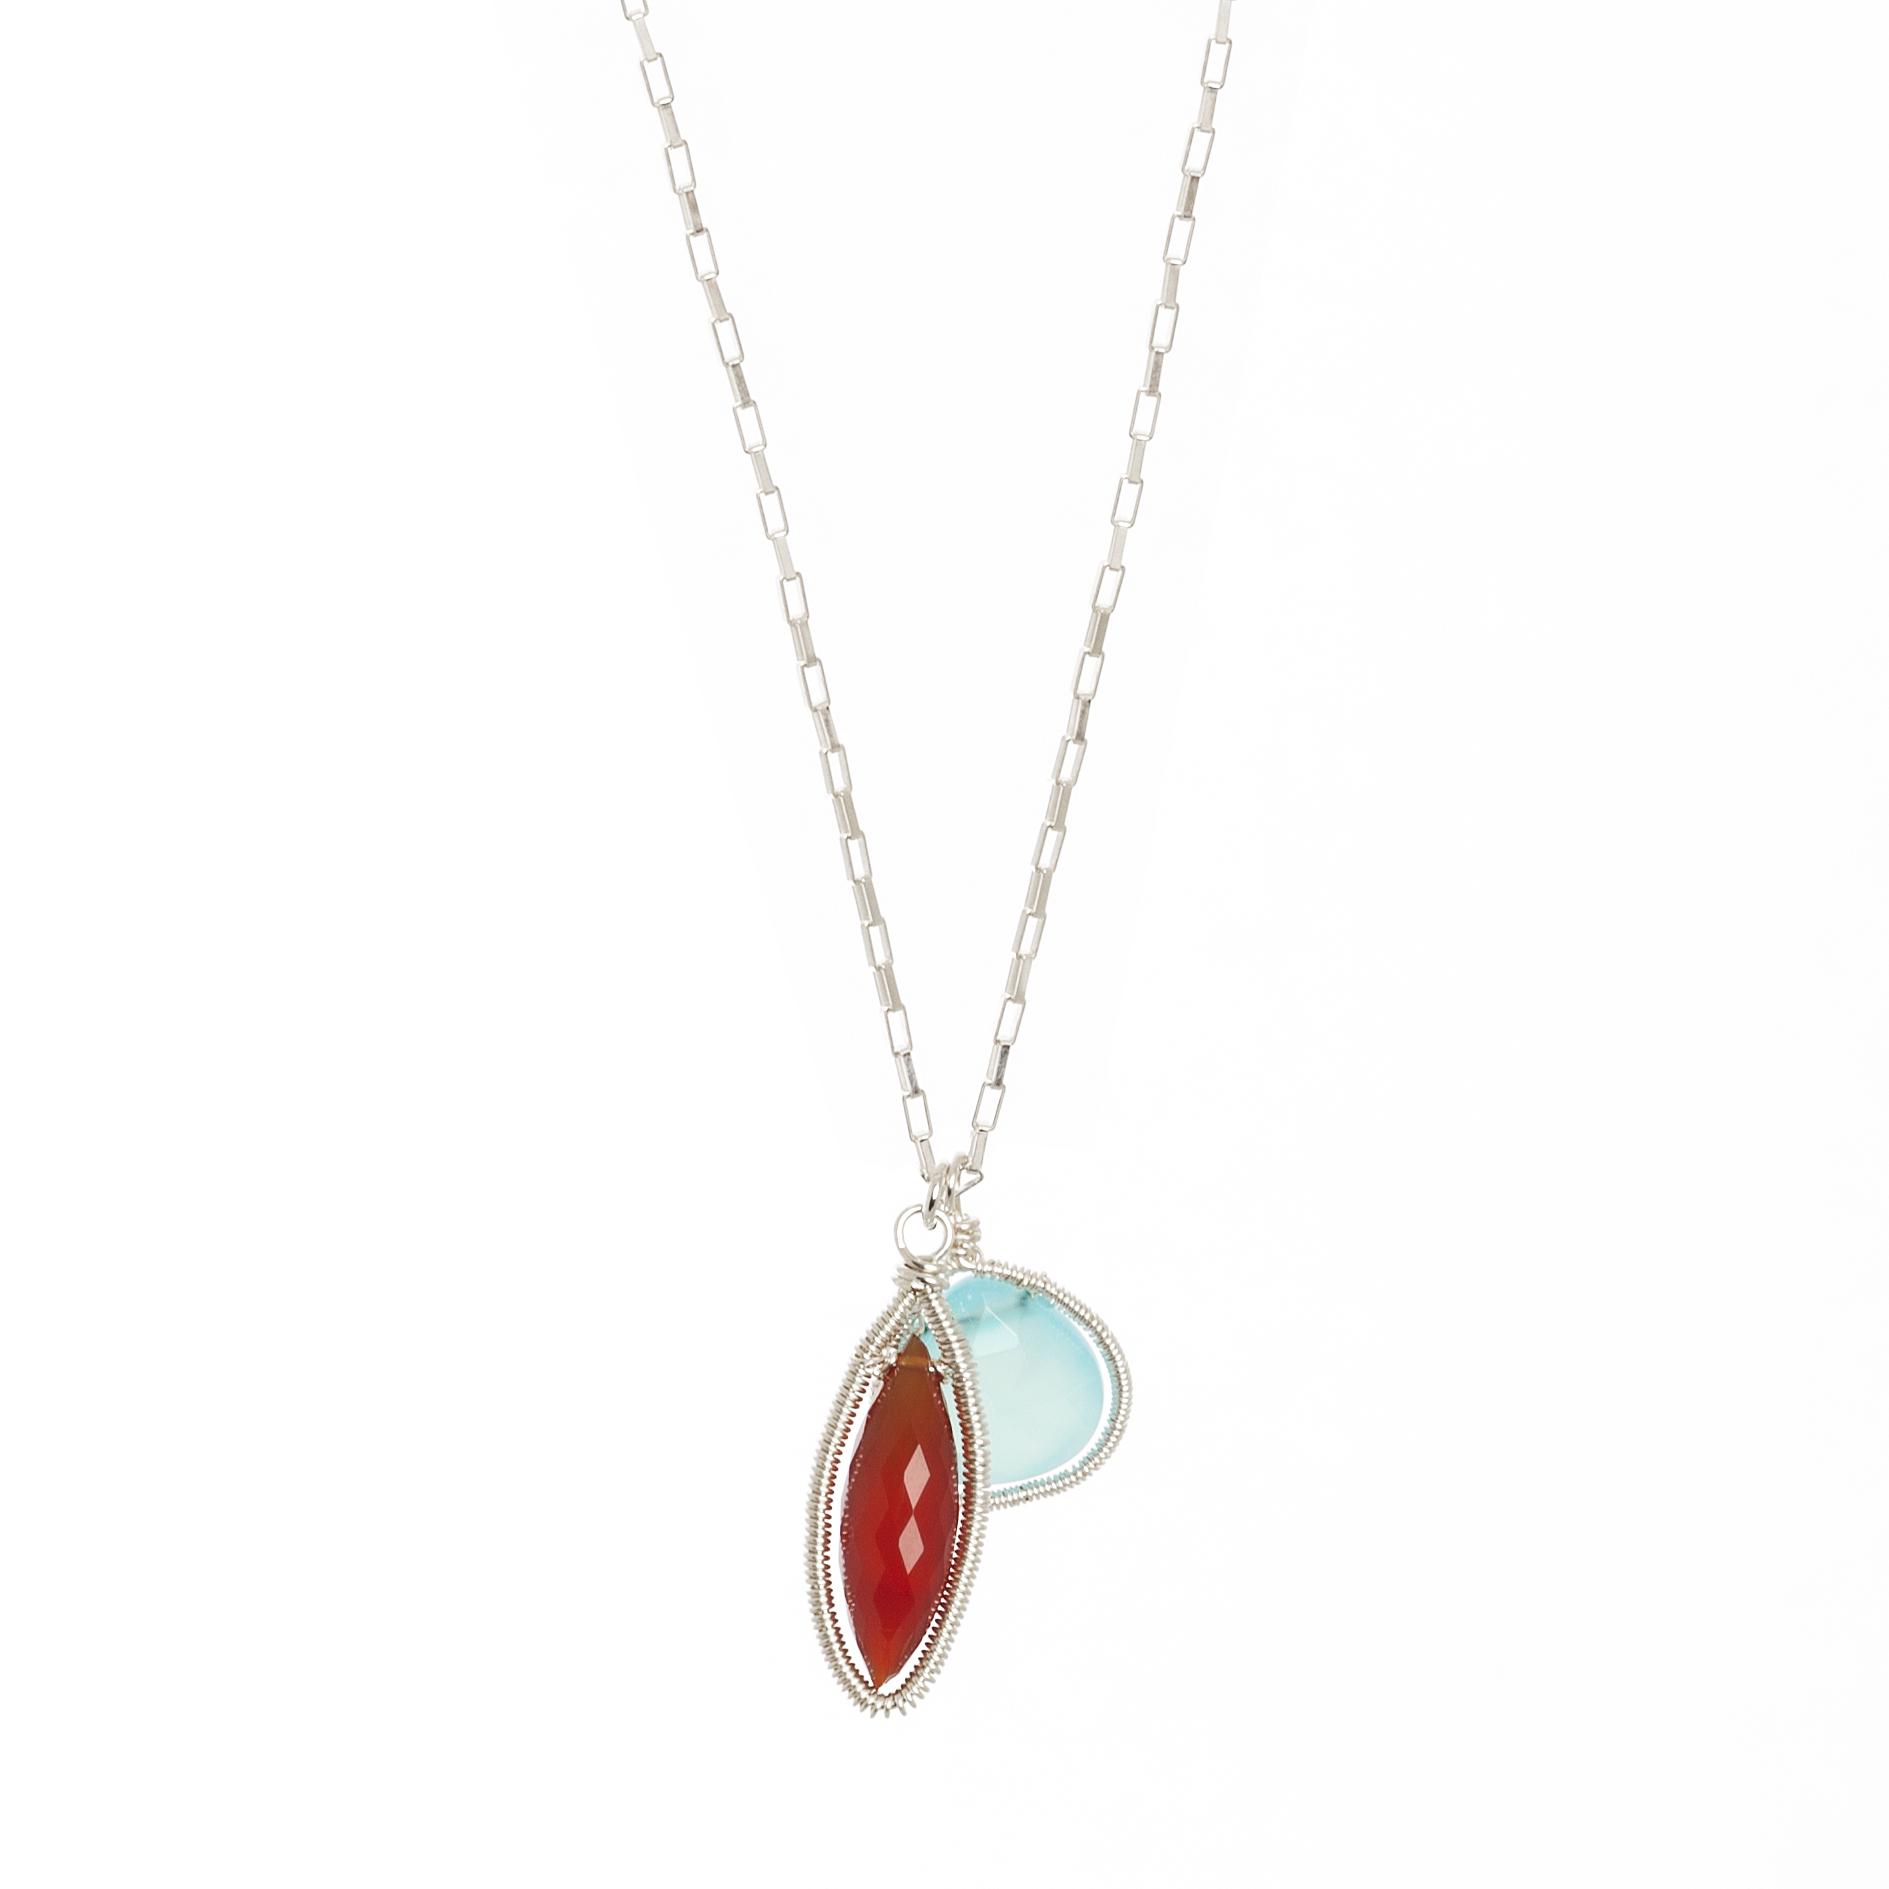 Carnelian and Chalcedony Pendant Sterling Silver Necklace